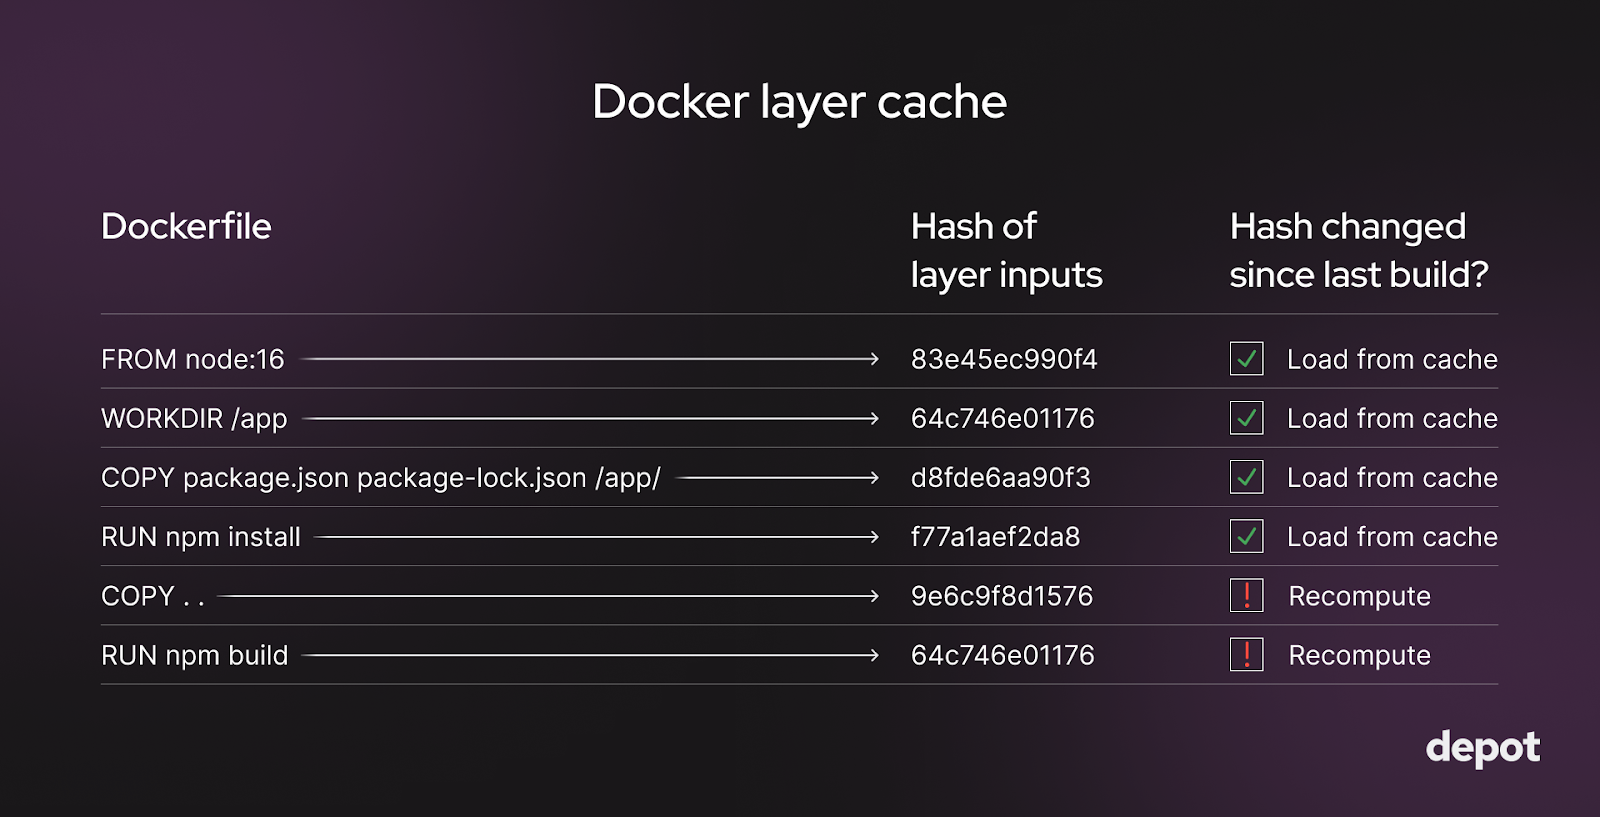 Dockerfile lines map to hashes that are either present in the cache or will need to be recomputed.